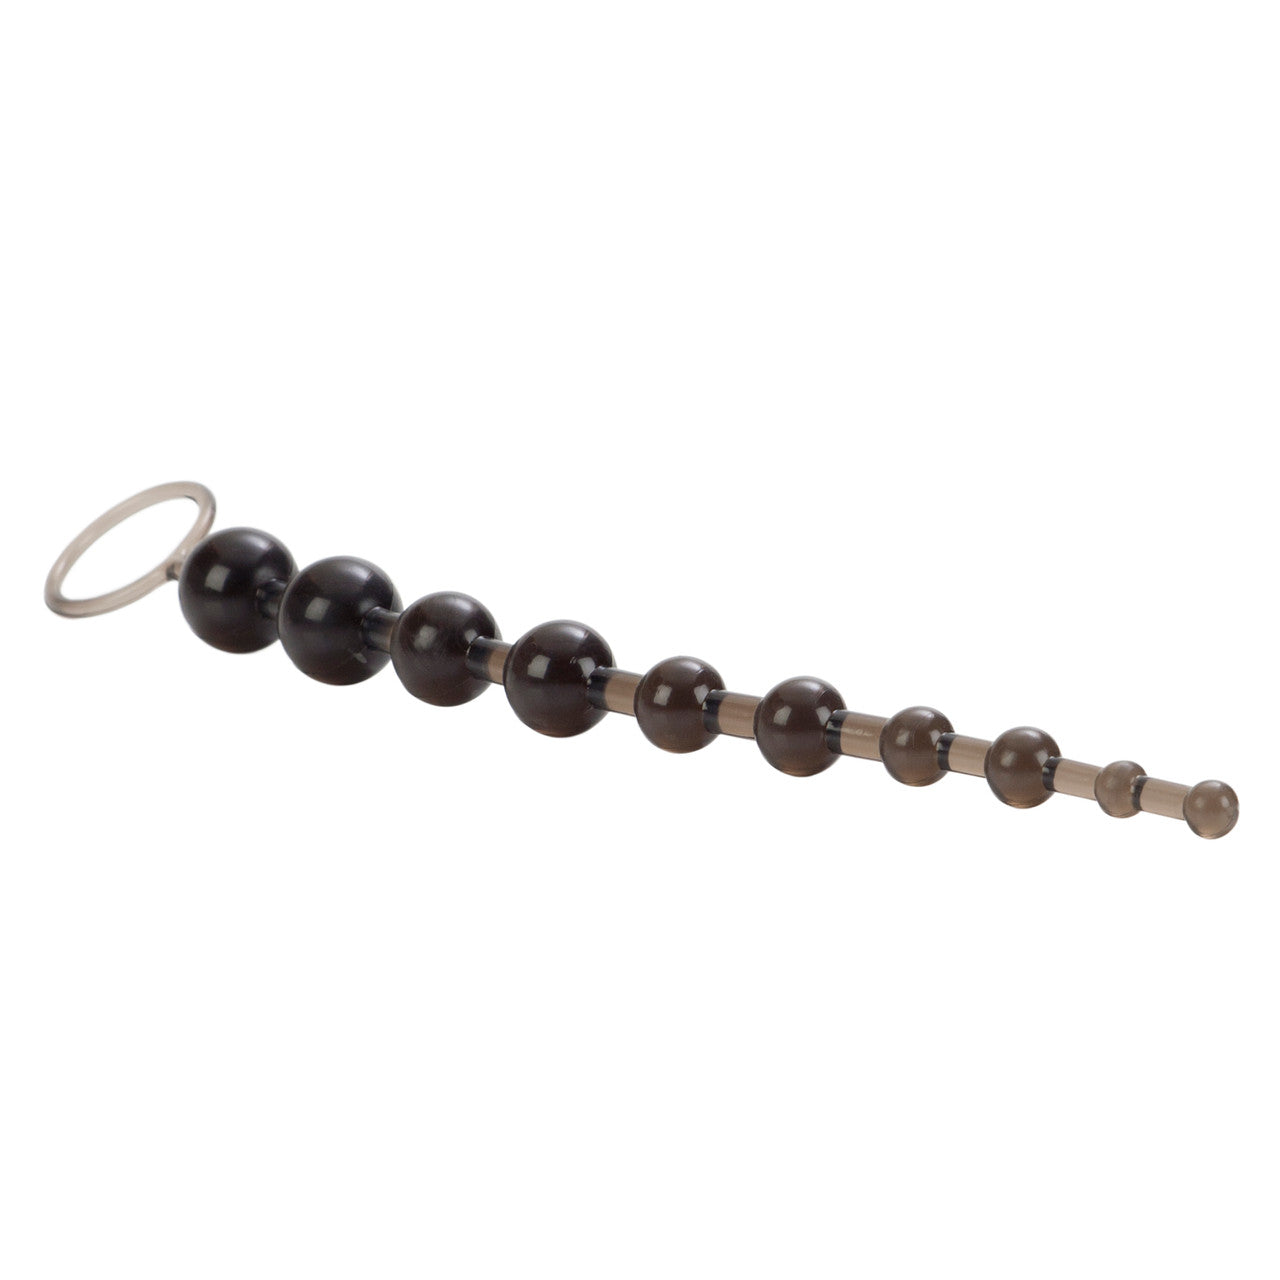 X-10 Anal Beads - Black - Thorn & Feather